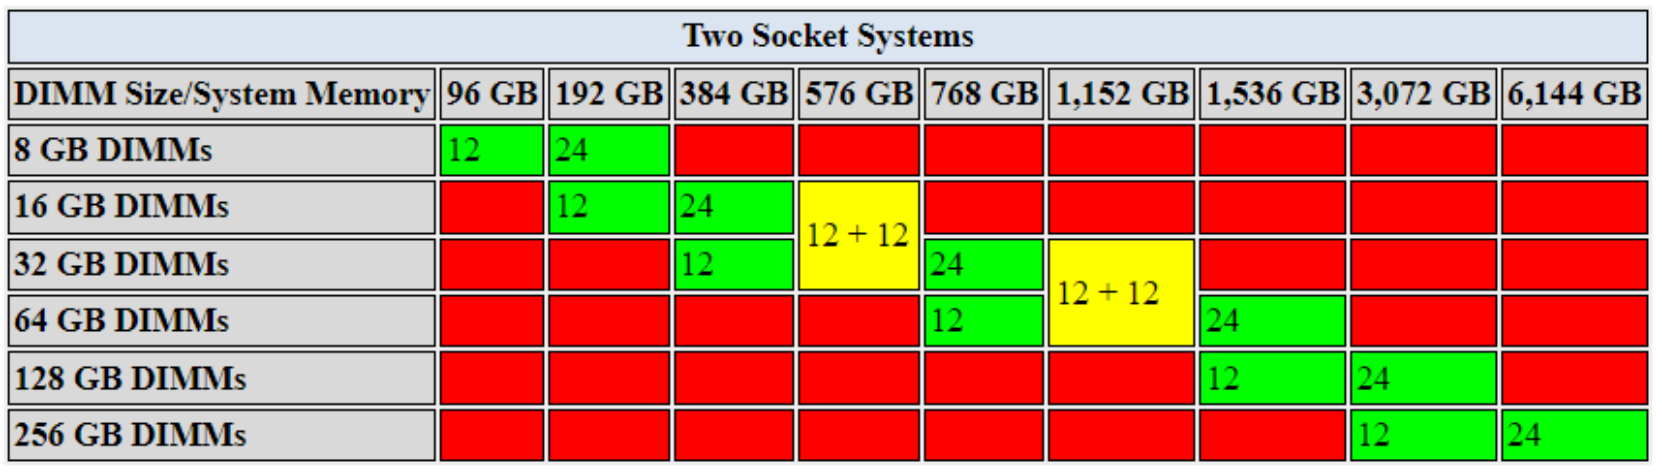 Table showing the supported SSupported DIMM/memory configurations for two-socket 2nd Generation servers